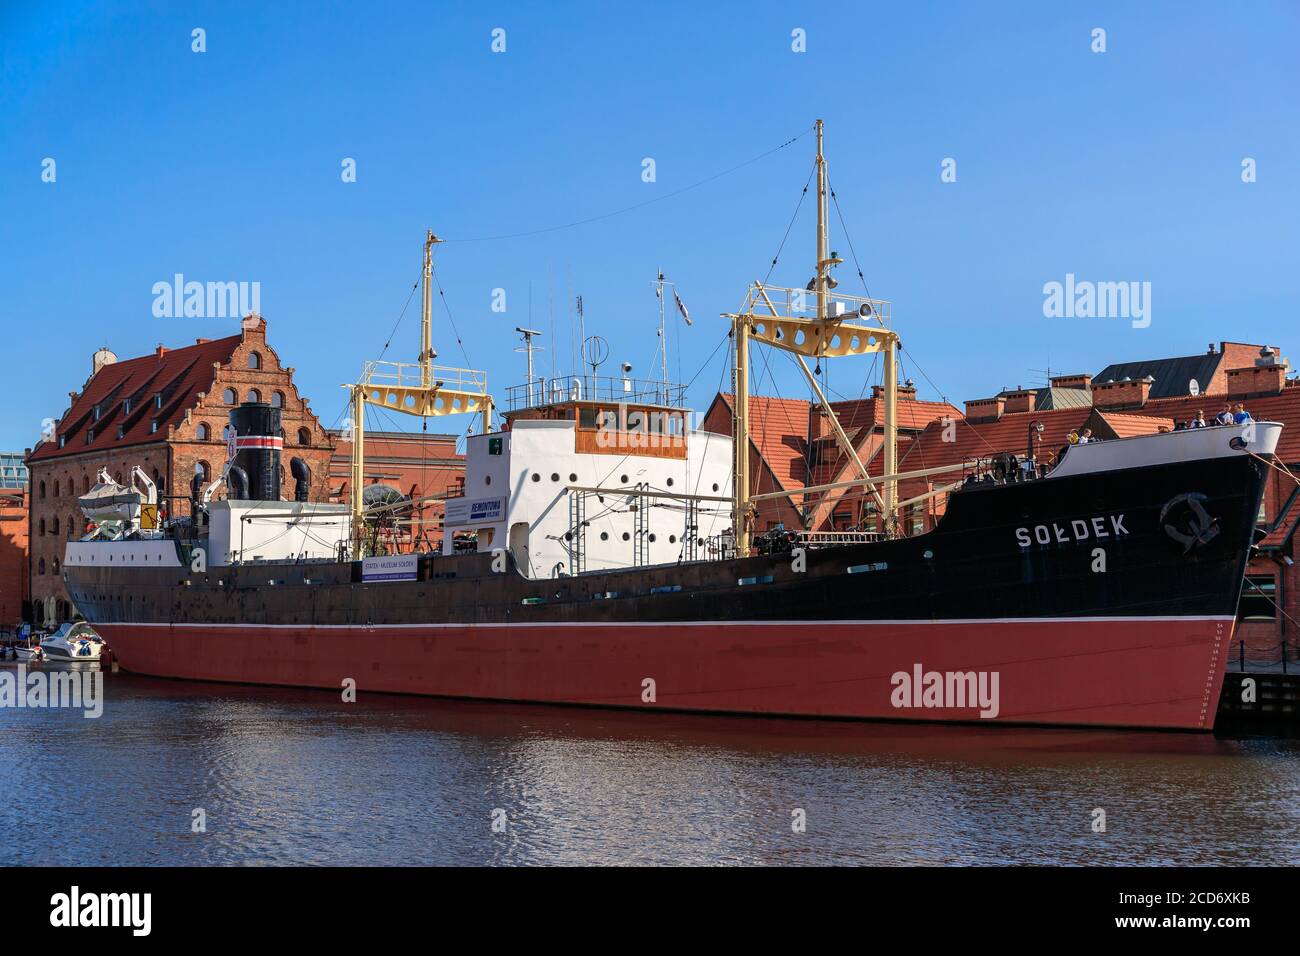 GDANSK, POLEN - 2017 AUGUST 24. Motlawa River with museum ship SS Soldek, the first ship built in Poland after WWII. Stock Photo